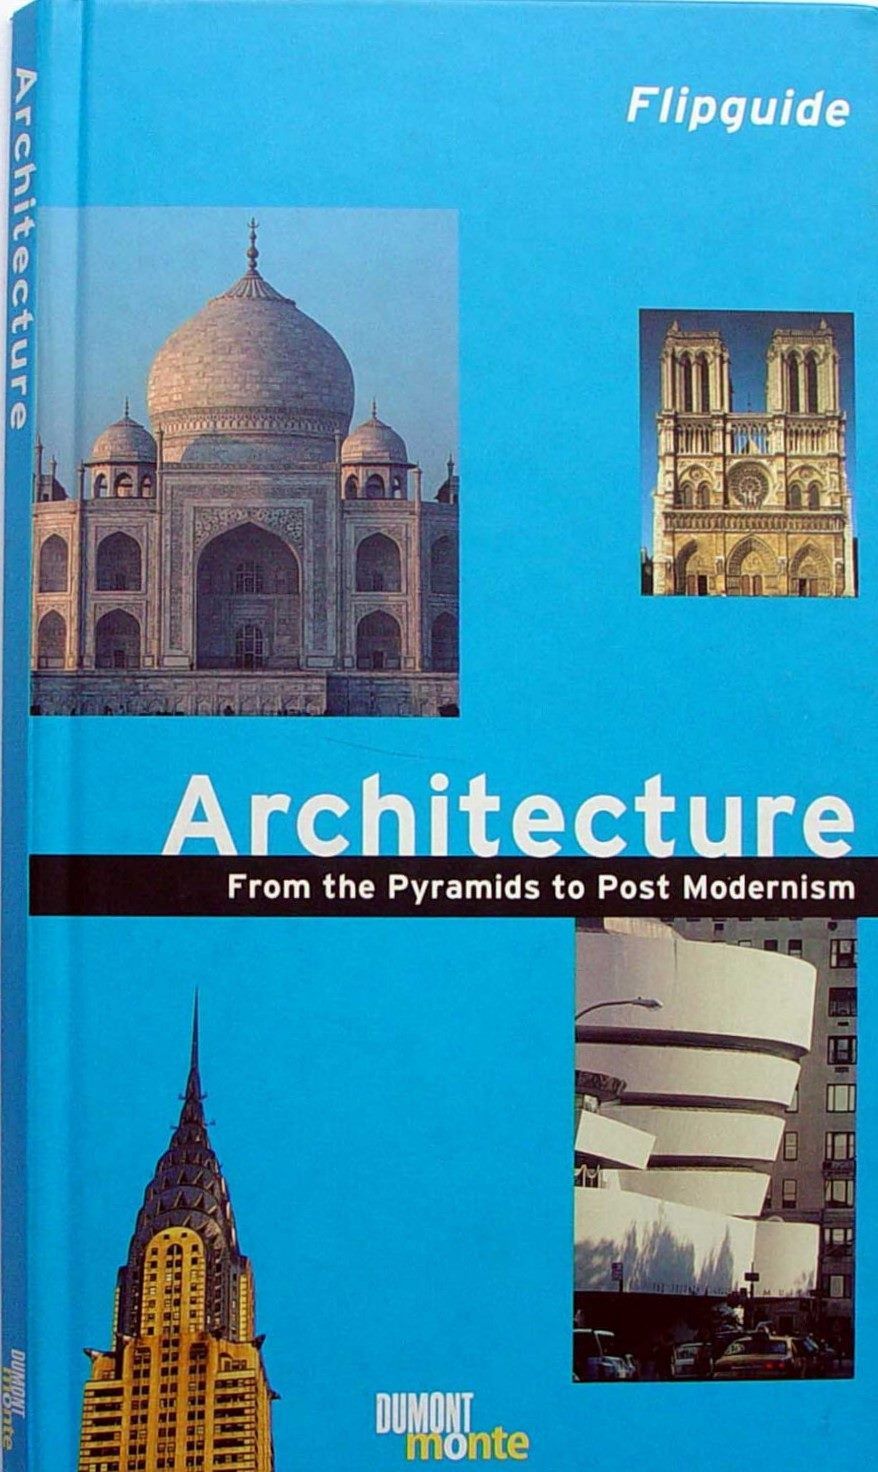 ACRHITECTURE: From the Pyramids to Post Modernism - Flipguide